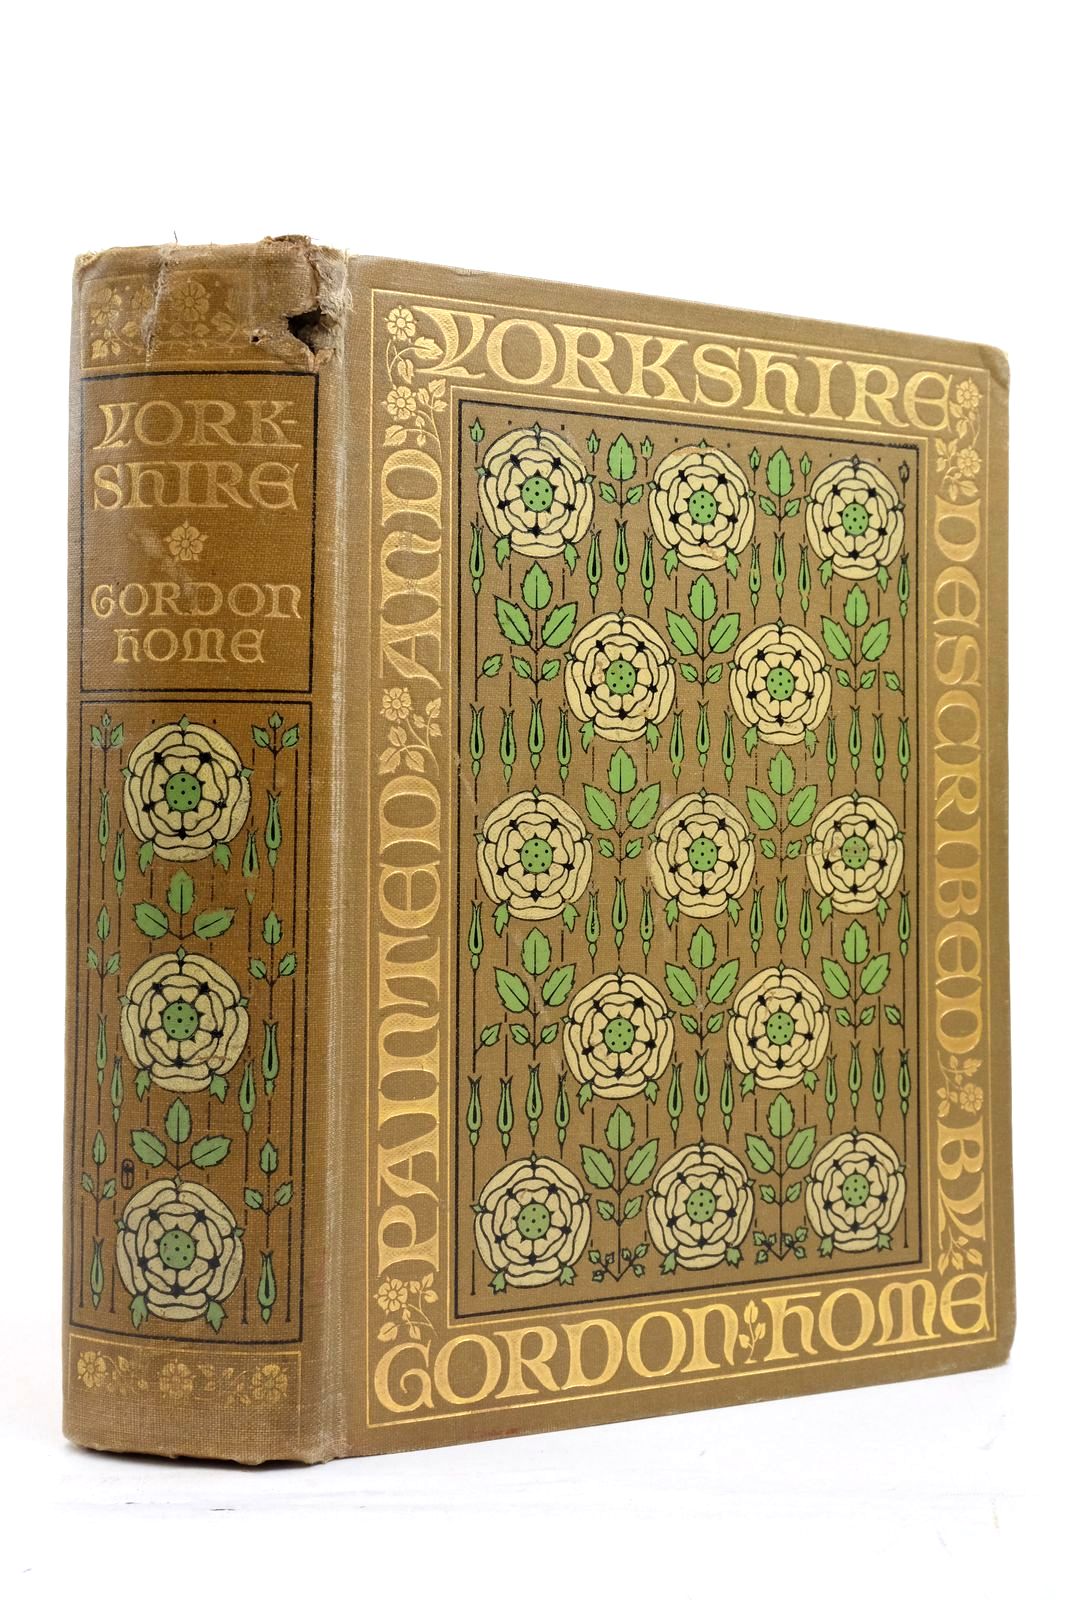 Photo of YORKSHIRE written by Home, Gordon illustrated by Home, Gordon published by Adam &amp; Charles Black (STOCK CODE: 2137557)  for sale by Stella & Rose's Books